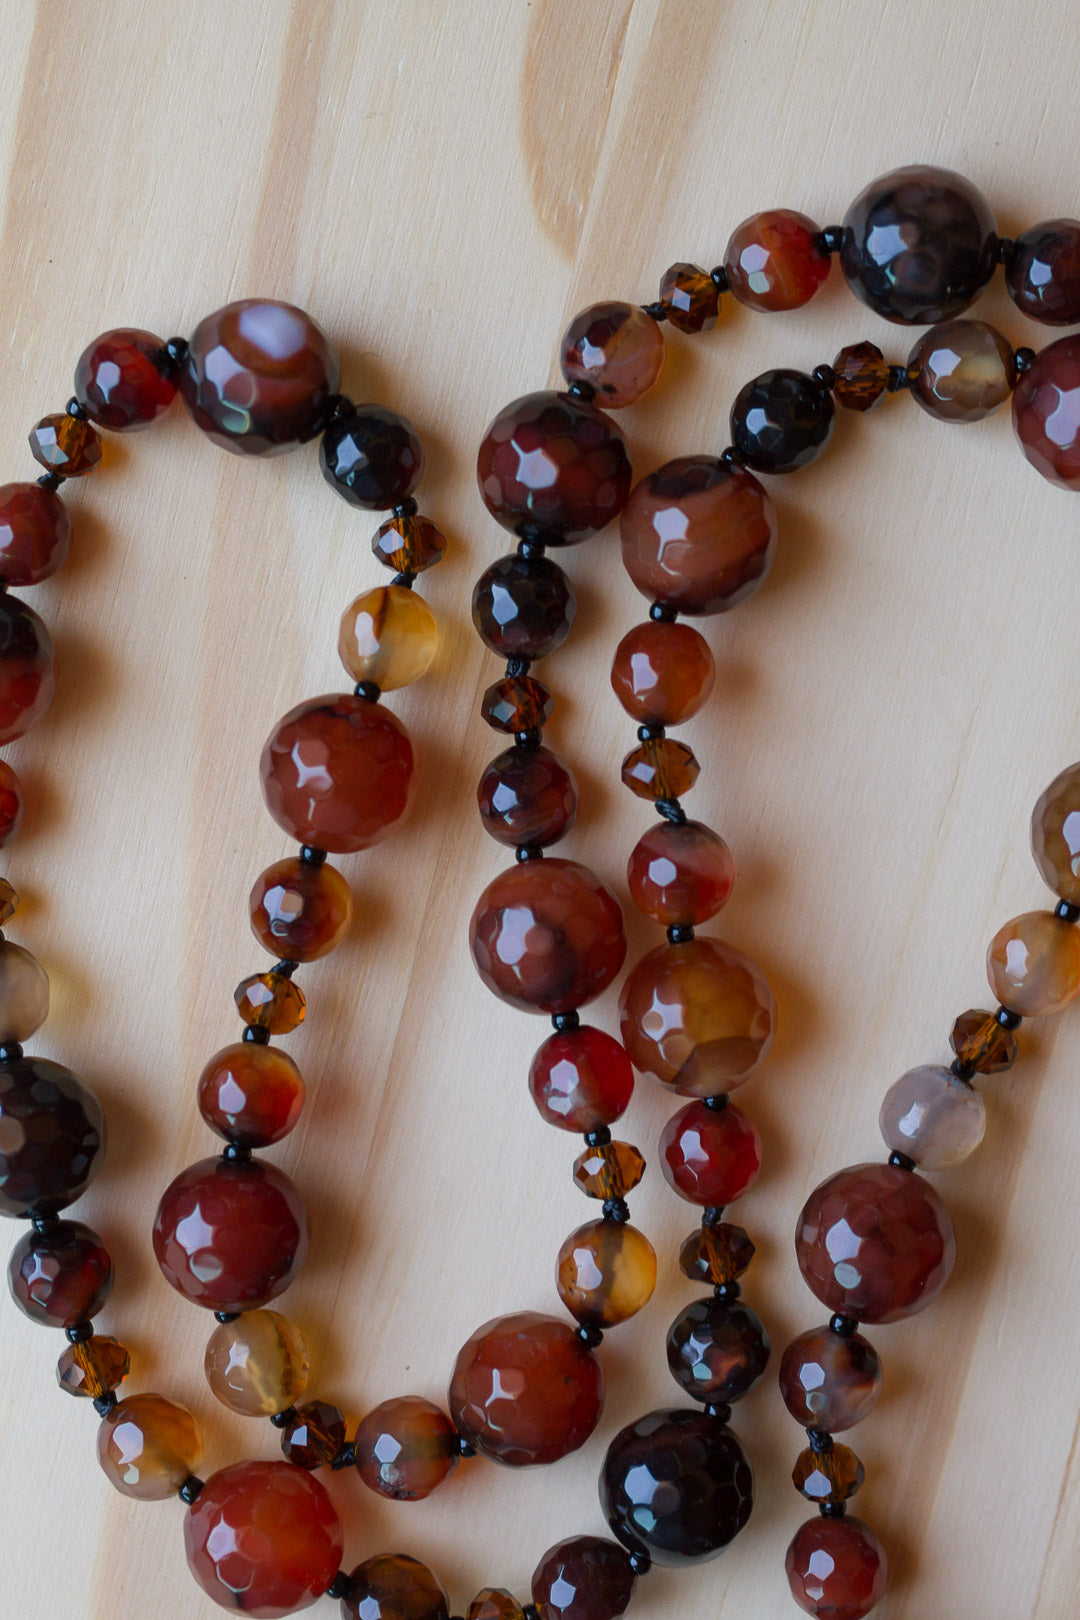 30" Black Brown Agate Beaded Necklace with Crystal Beads - My Urban Gems